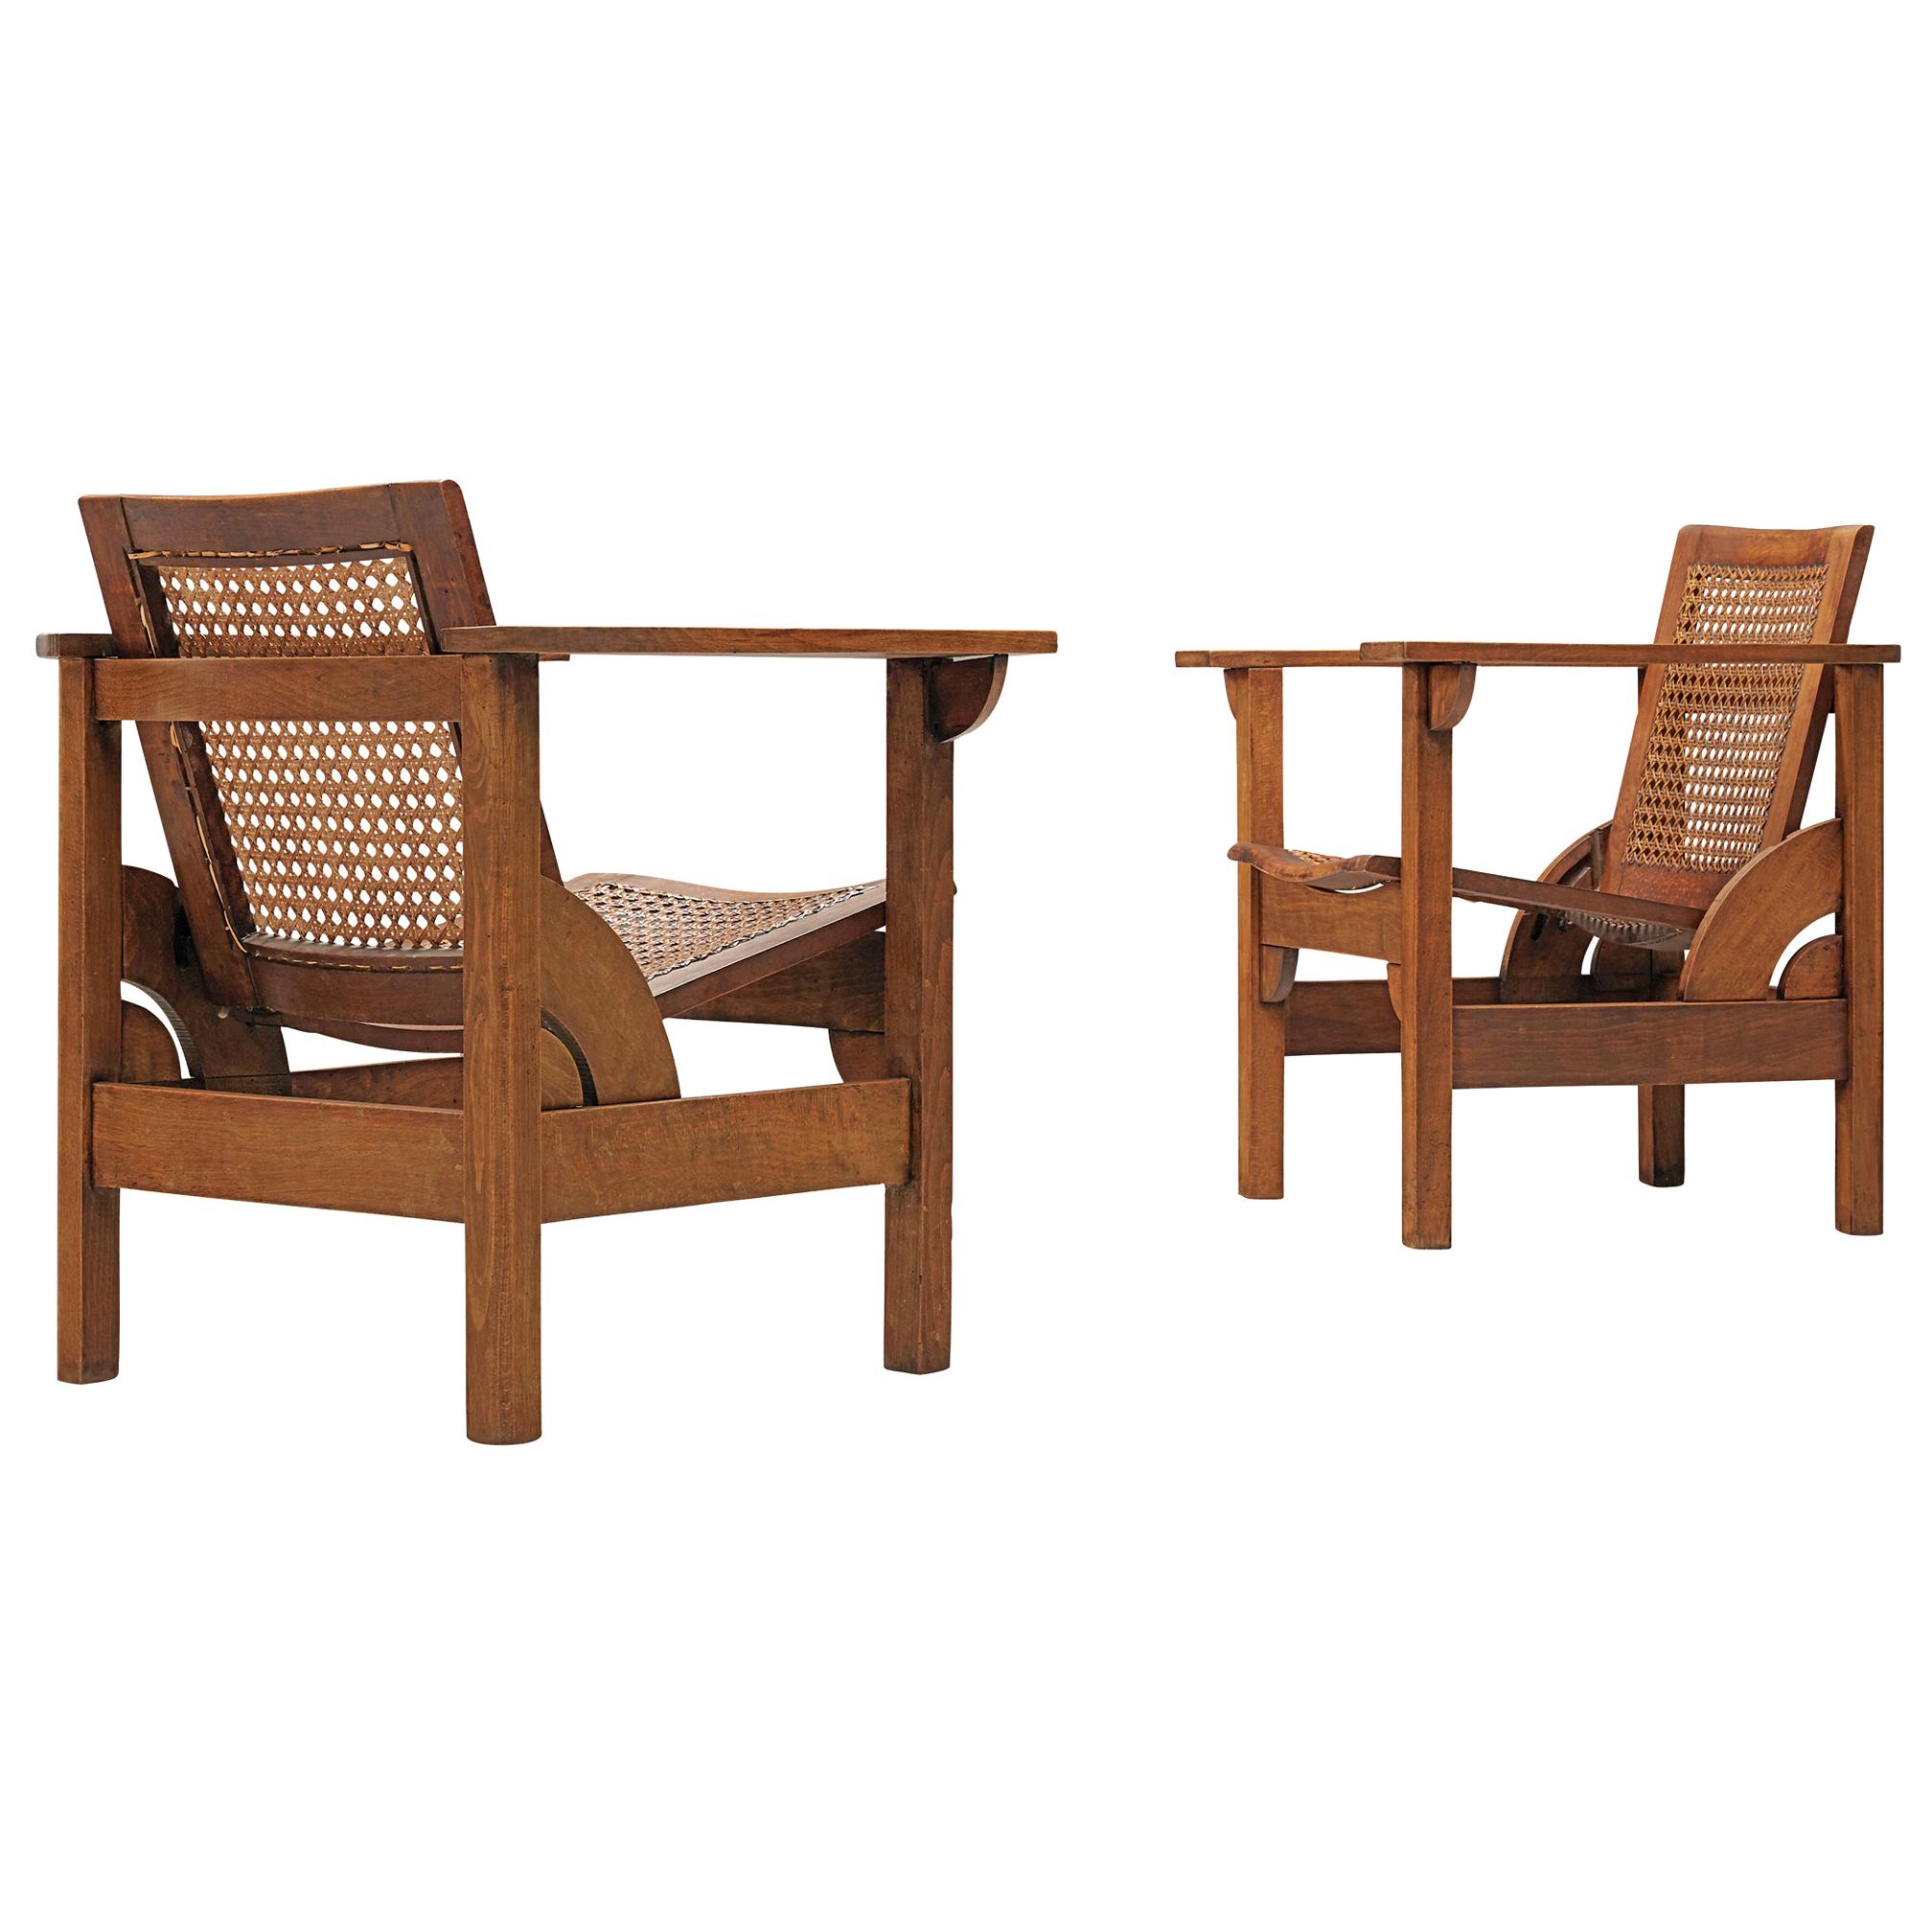 Pierre Dariel 'Hendaye' Armchairs in Wood and Cane